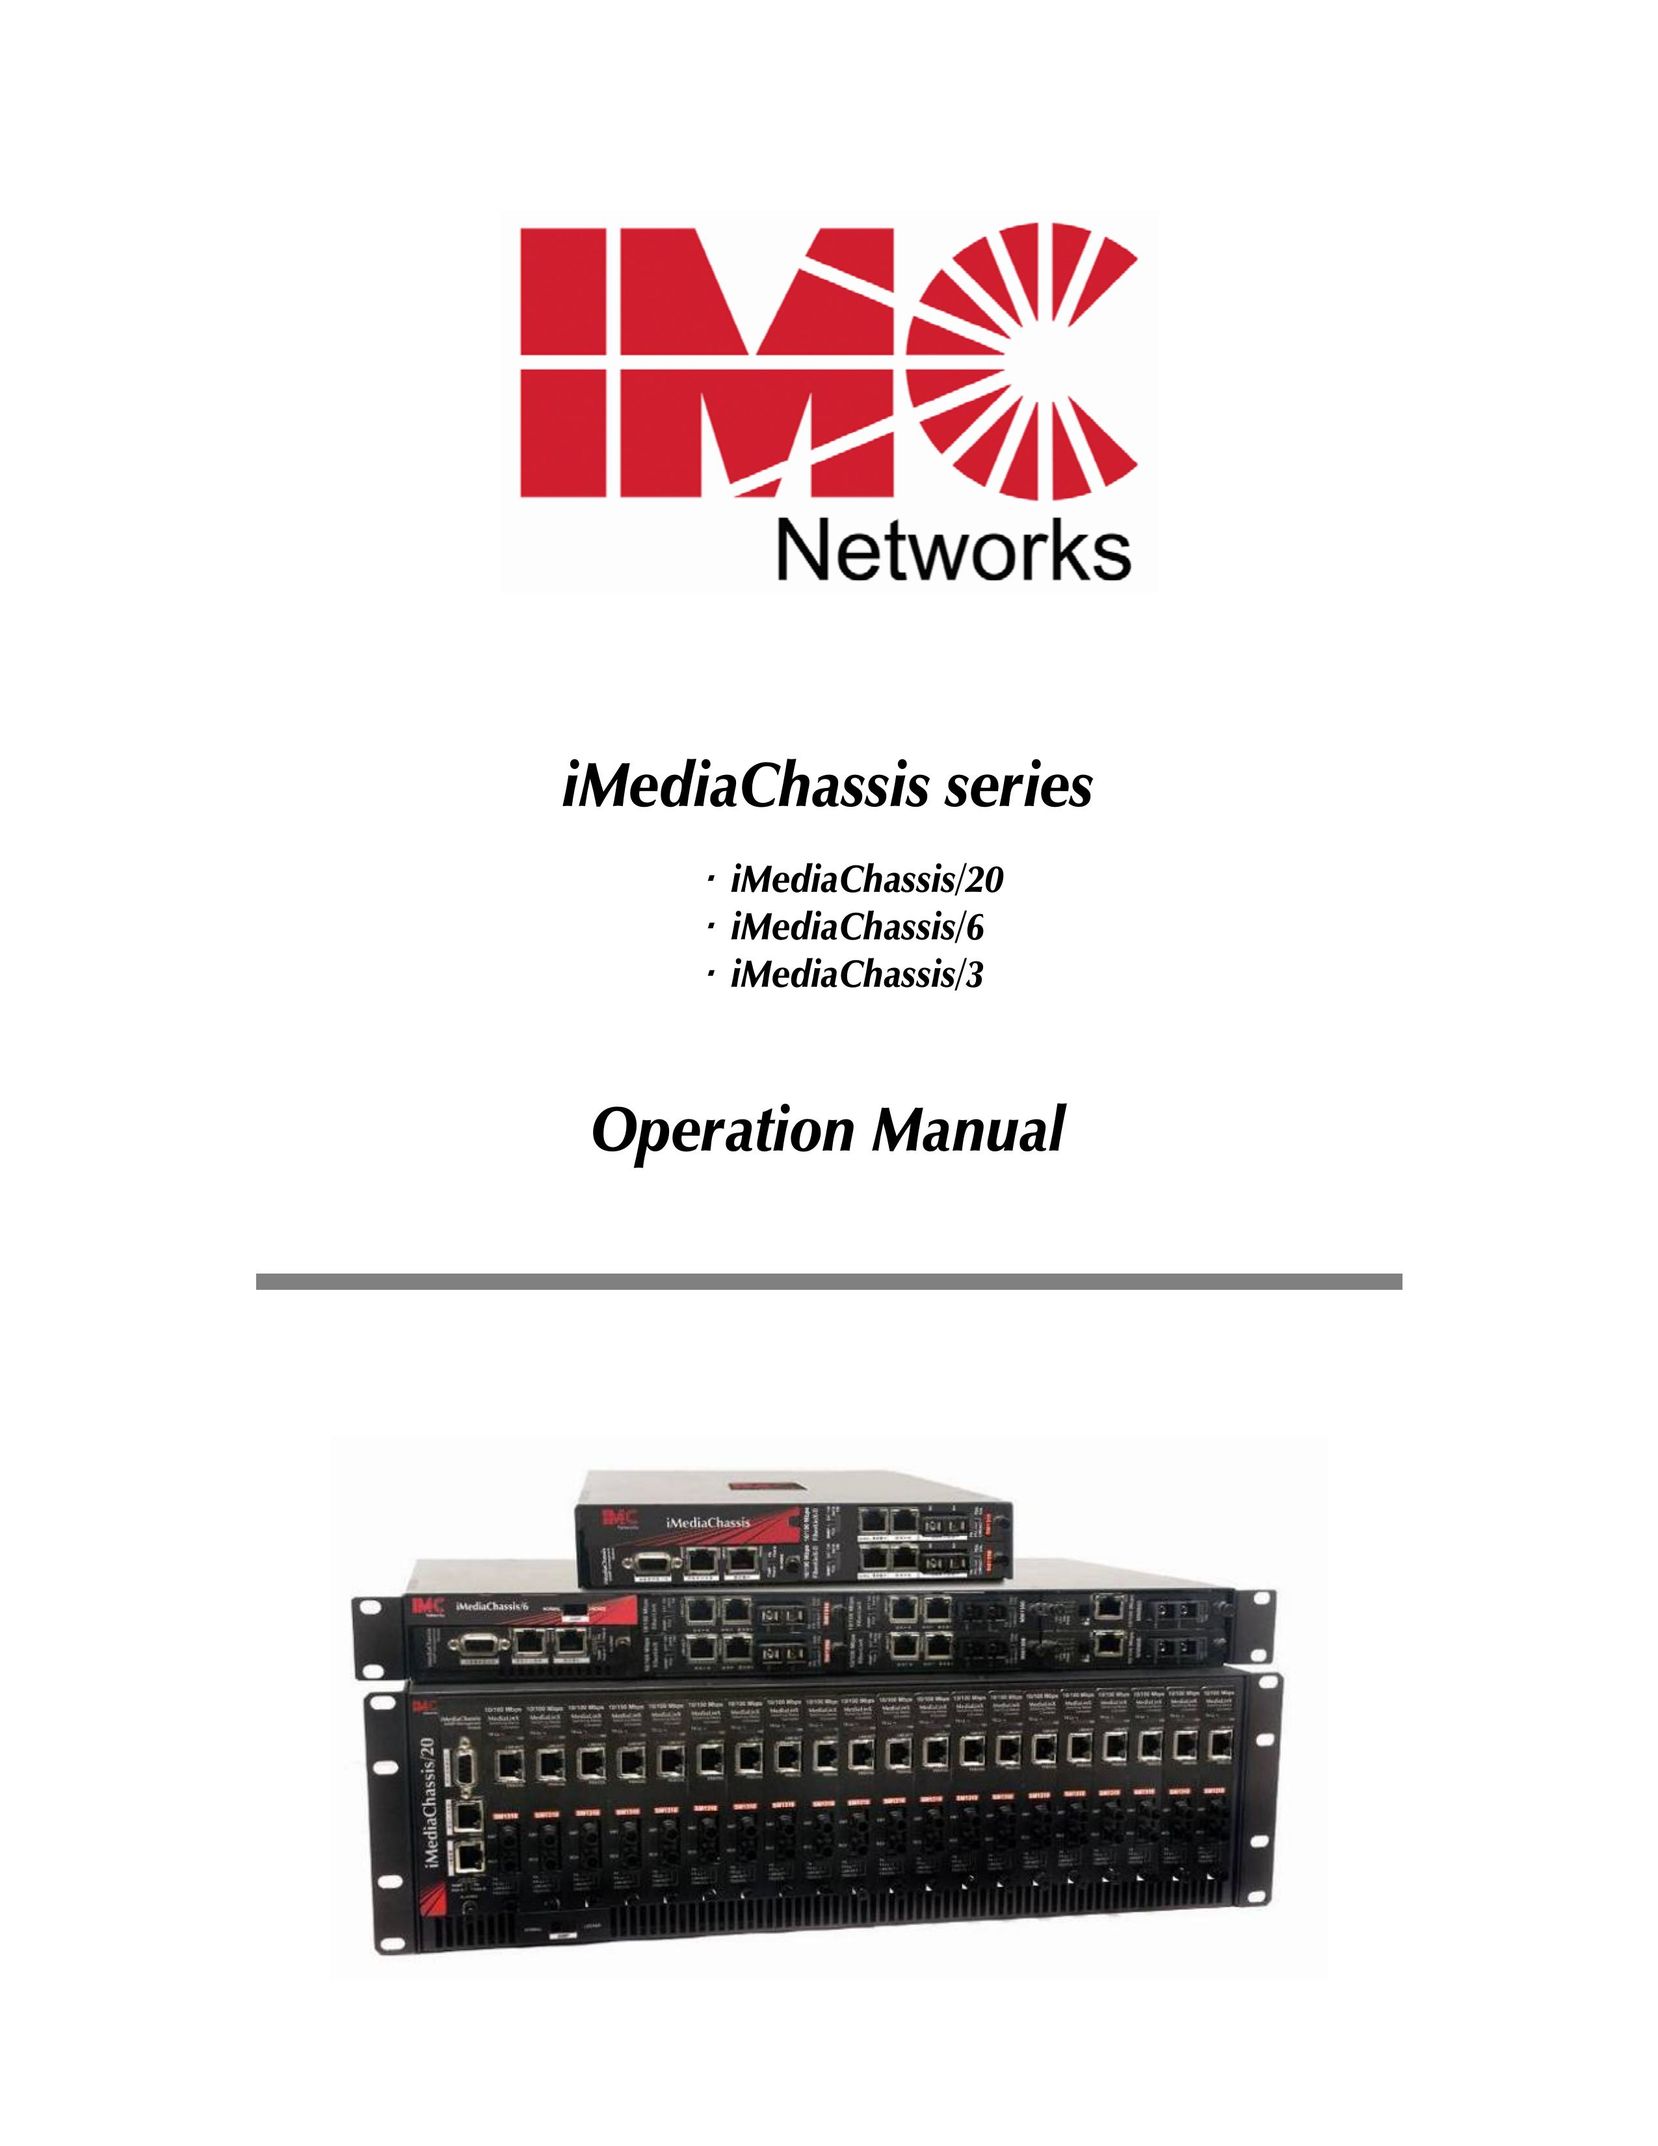 IMC Networks iMediaChassis/6 Network Router User Manual